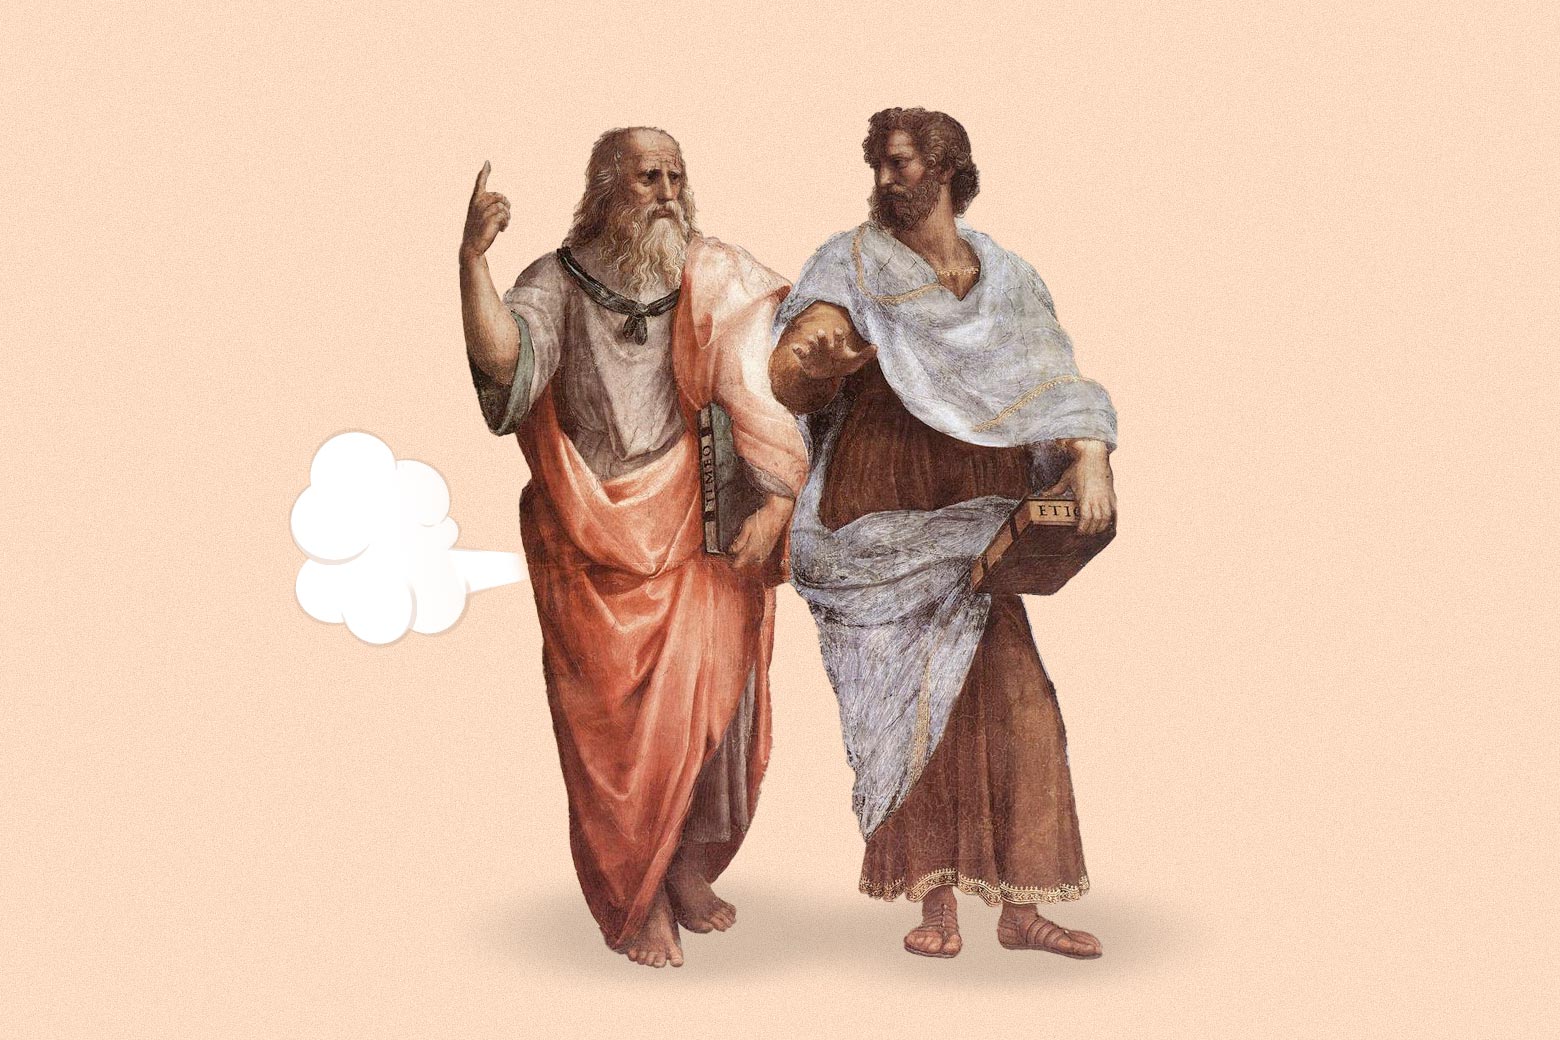 Plato and Aristotle from Raphael's School of Athens. A cartoon fart cloud emerges from Plato's butt.